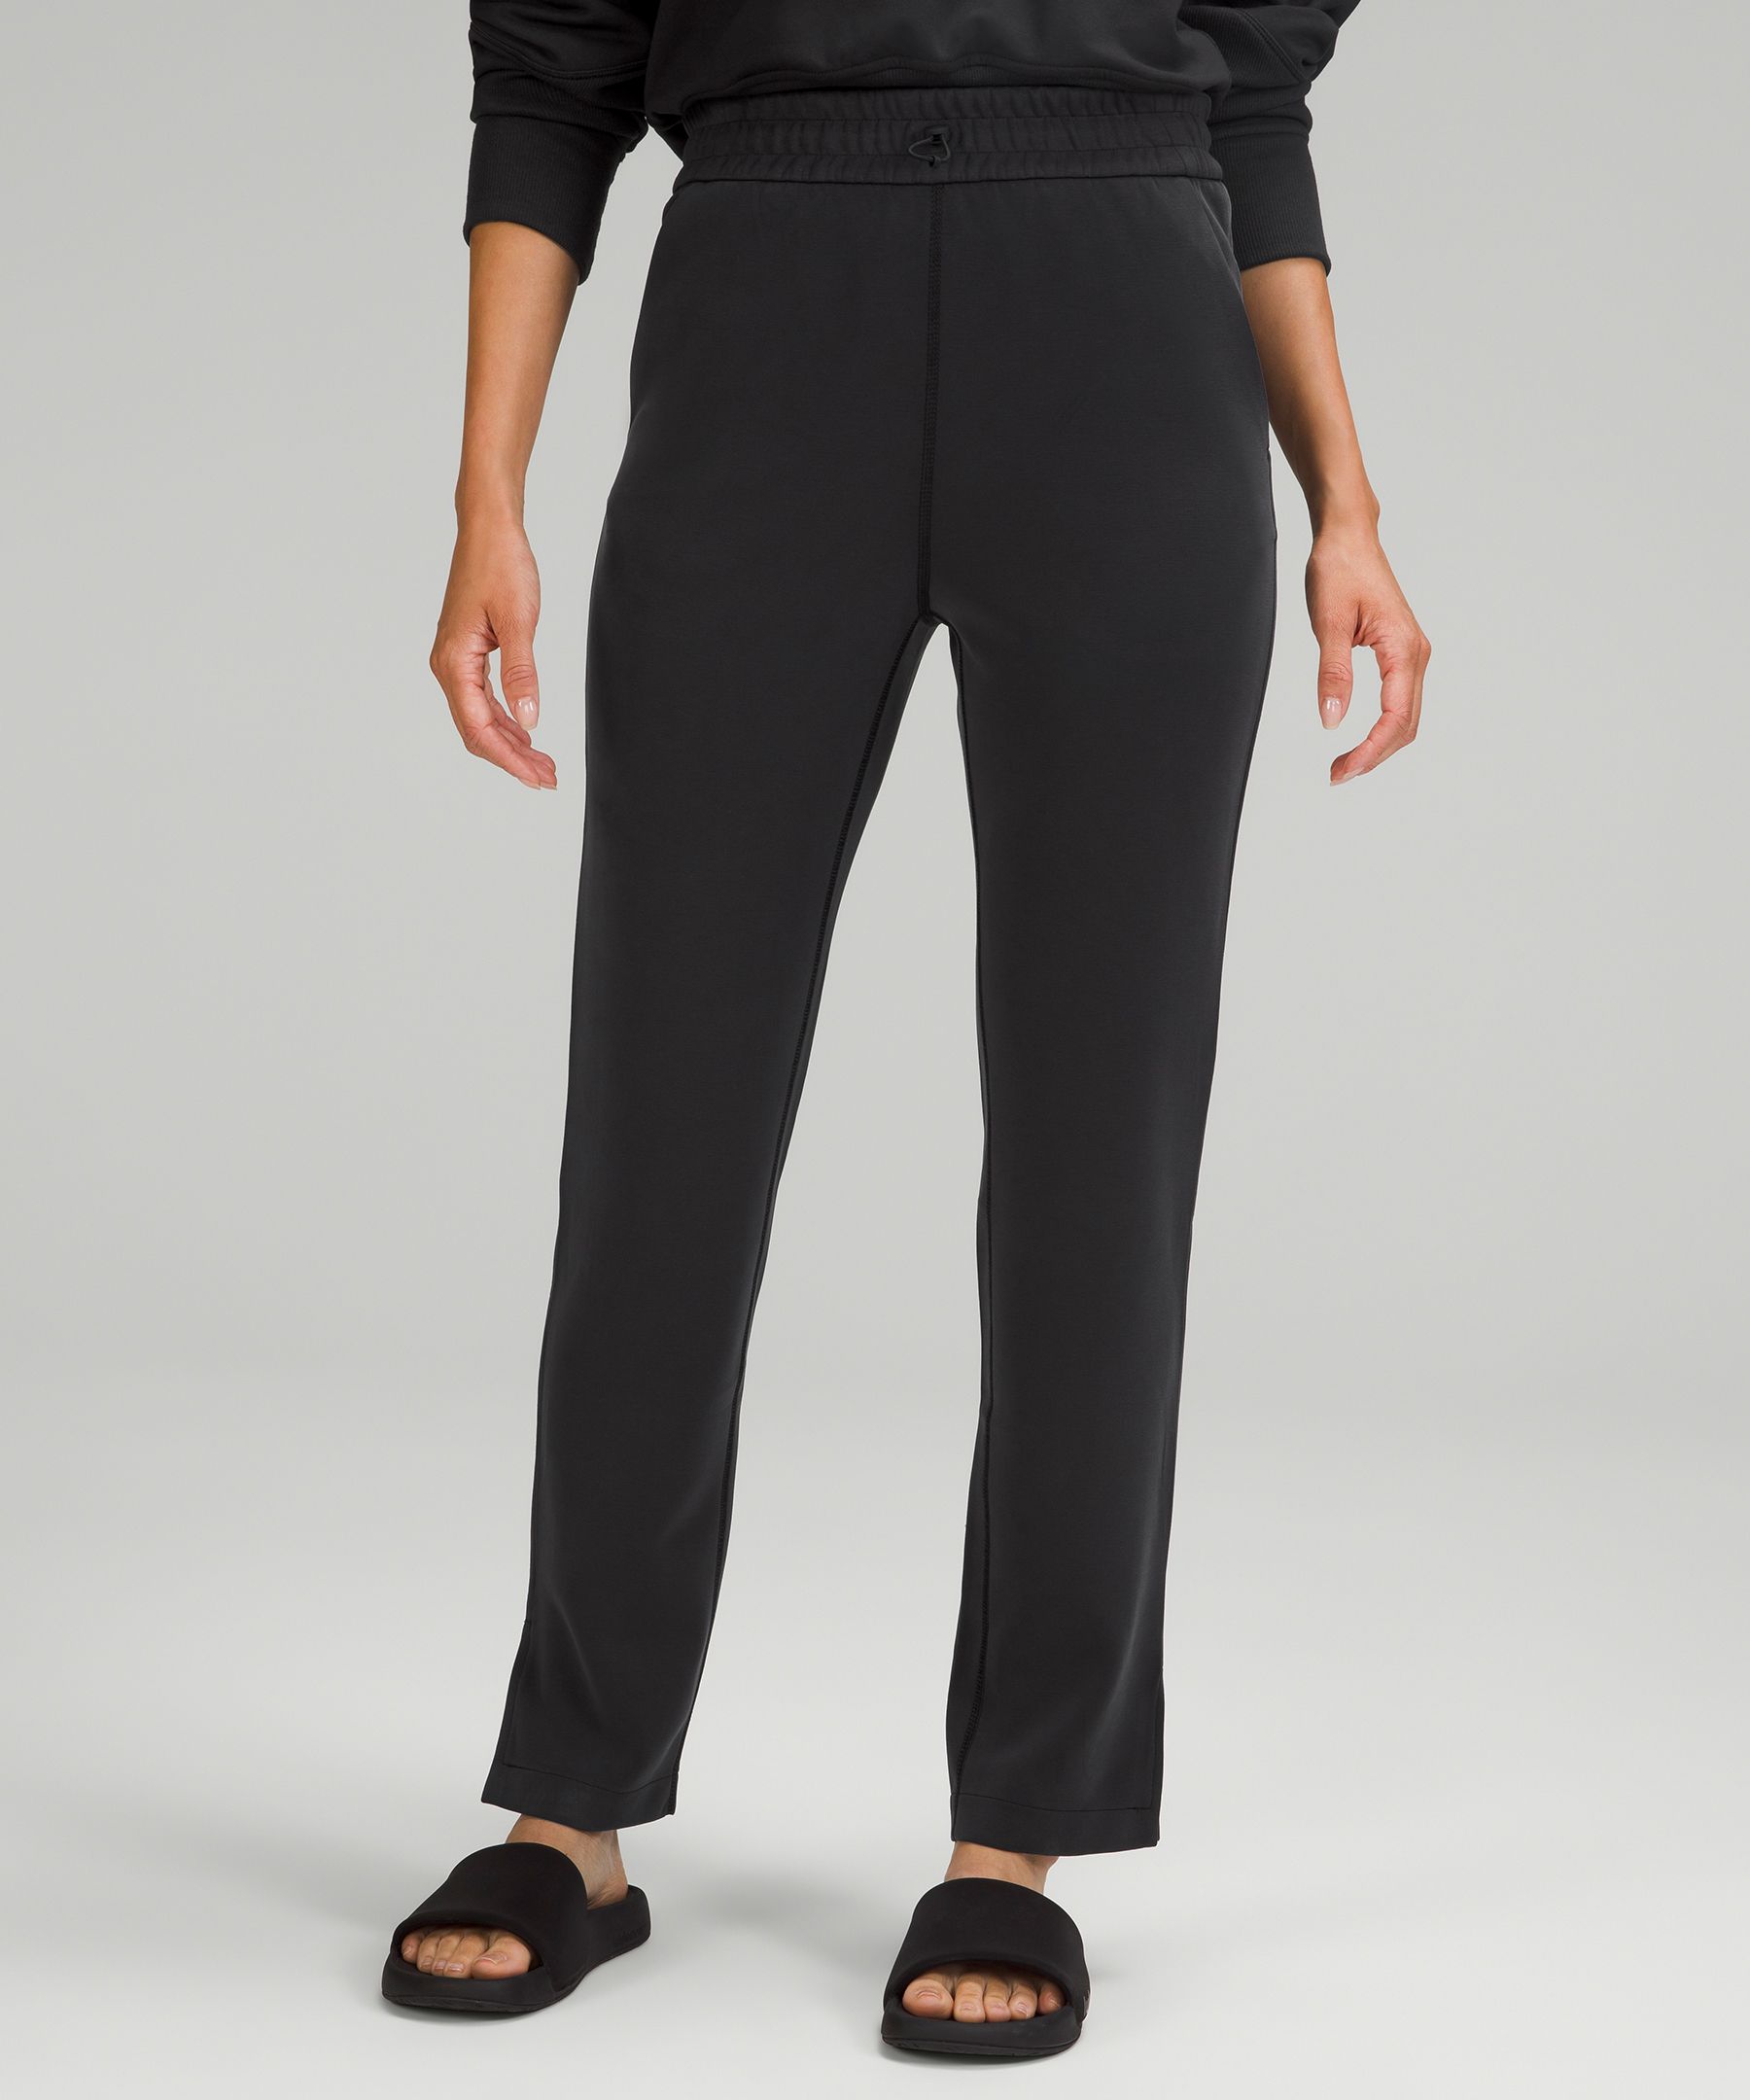 lululemon Women's License to Train High-Rise Pant- Asia Fit